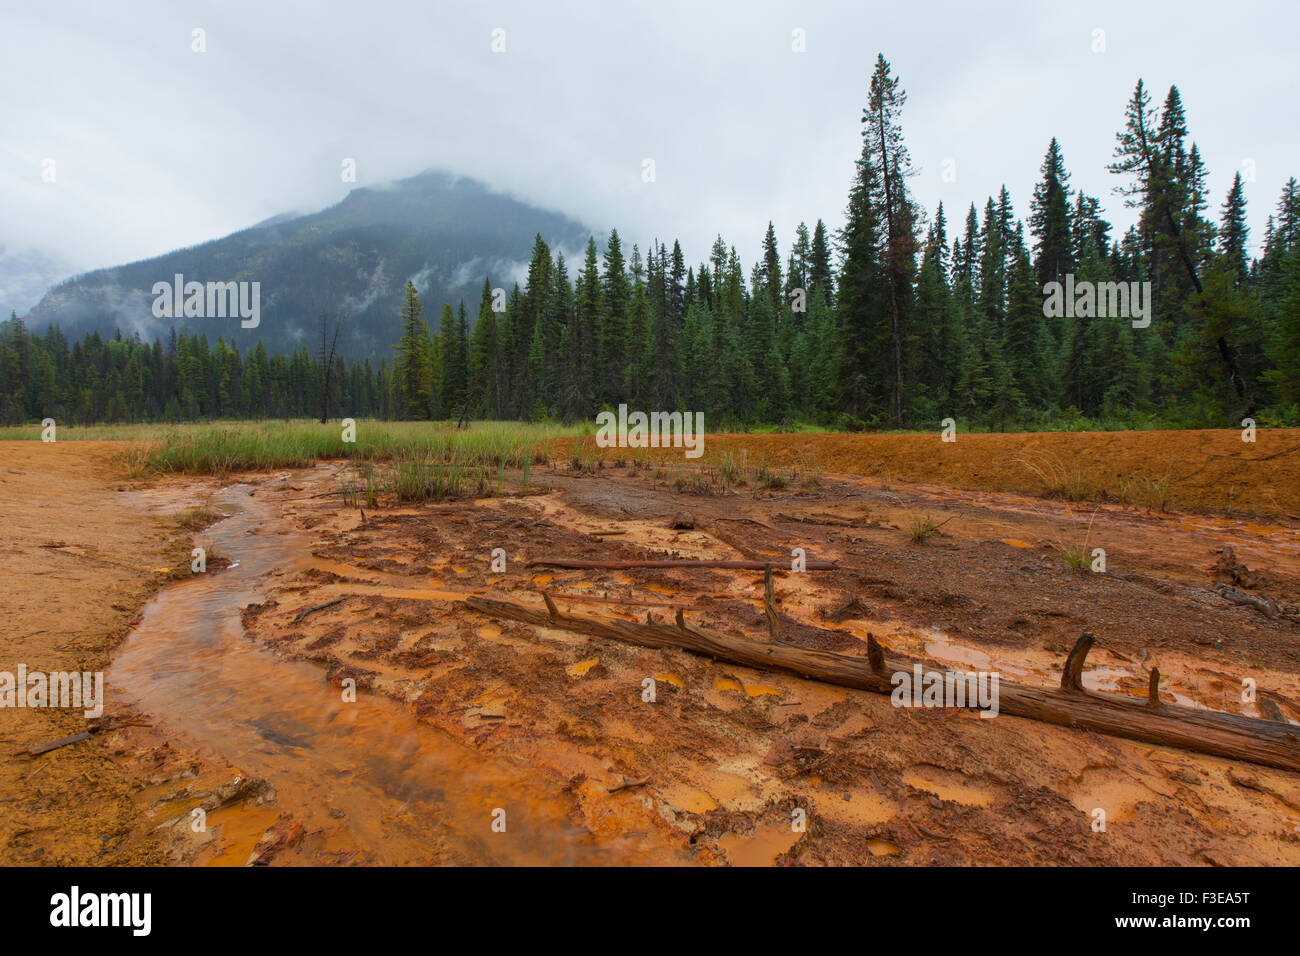 Paint Pots, iron-rich cold mineral springs in the Kootenay National Park, British Columbia, Canada Stock Photo